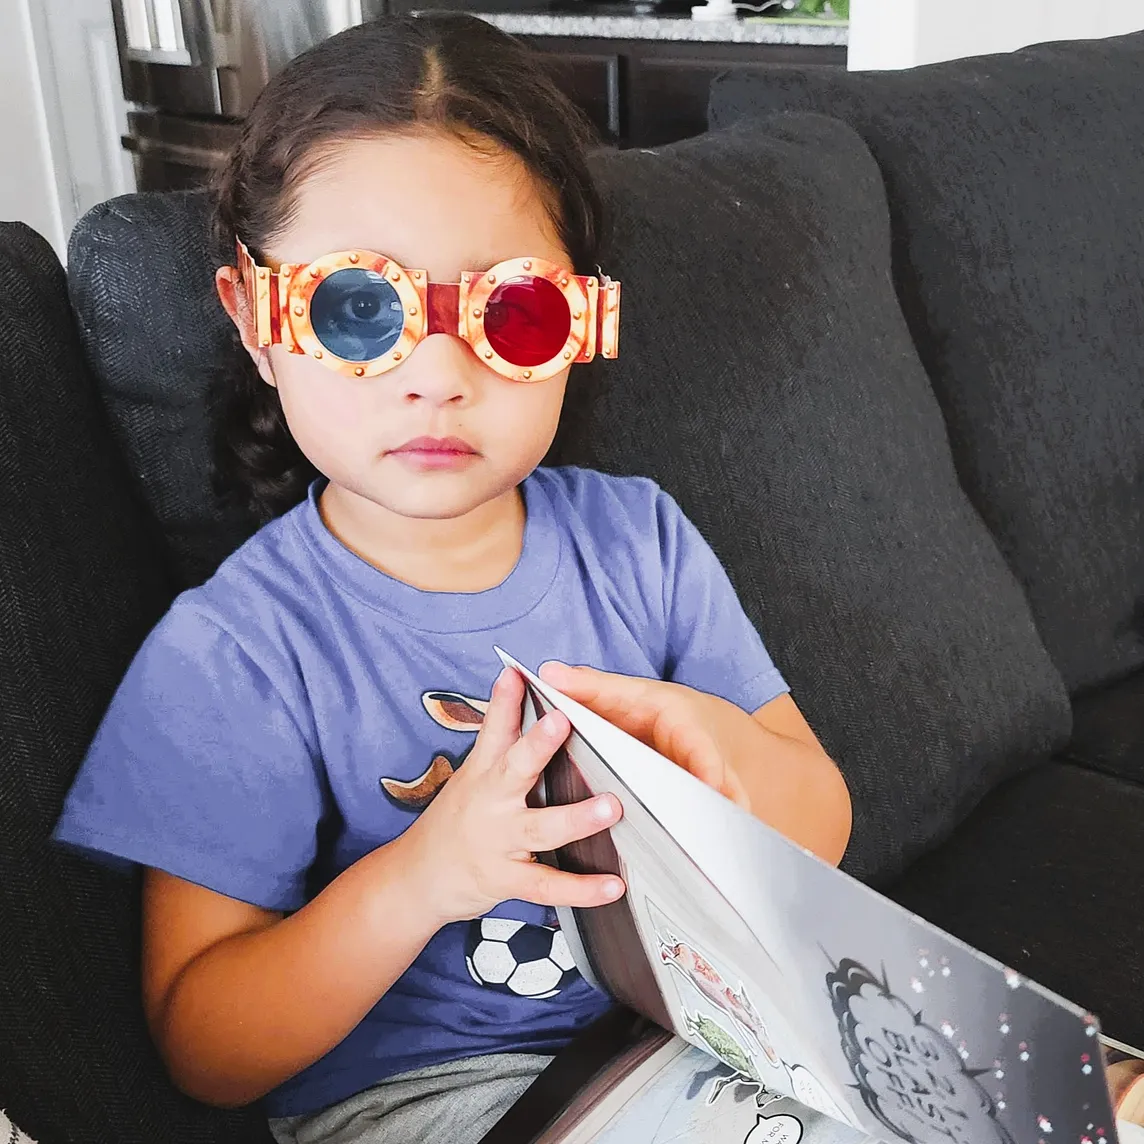 3D glasses on young child